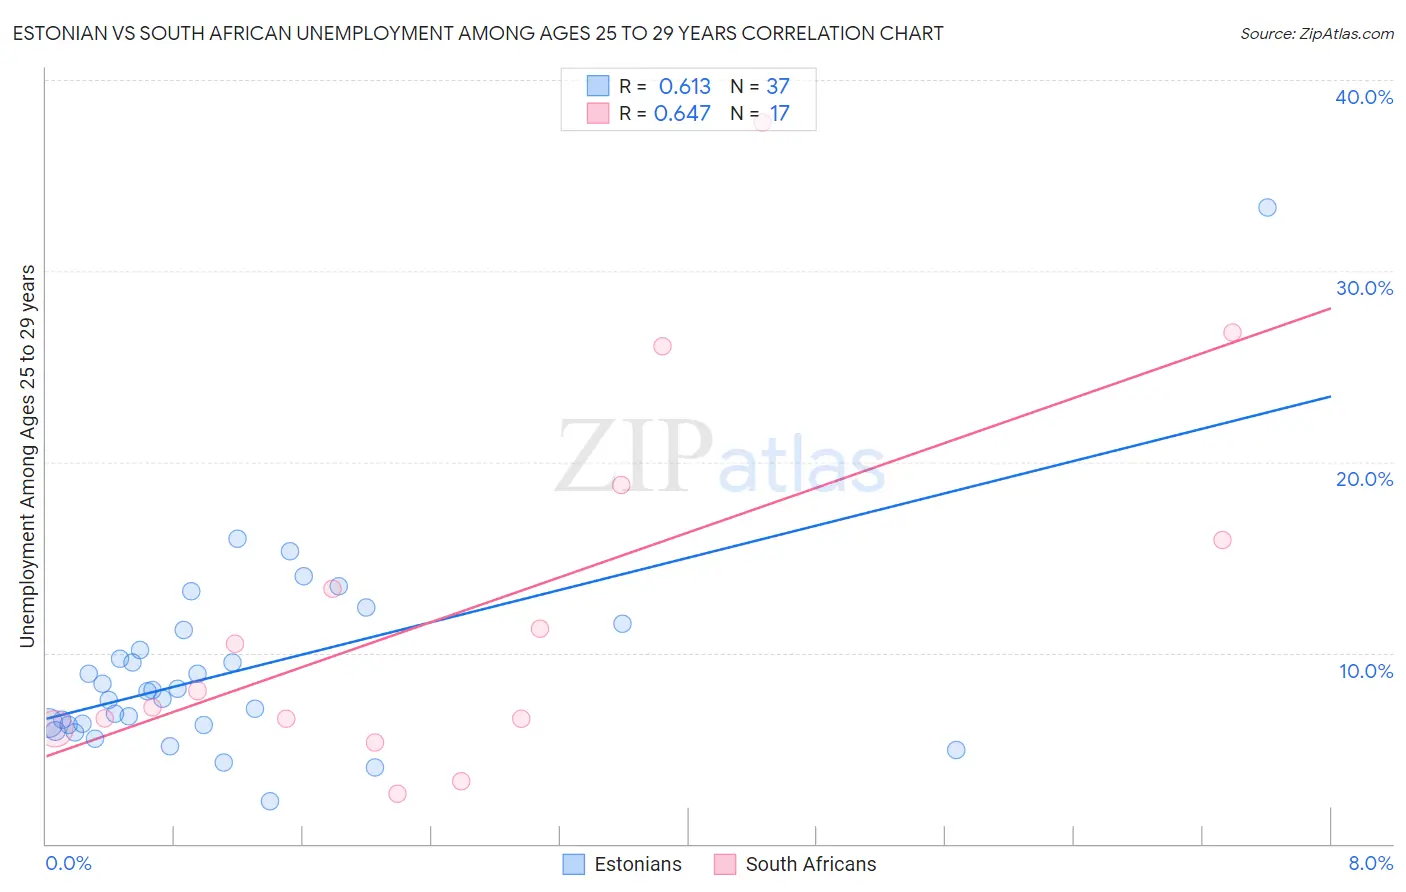 Estonian vs South African Unemployment Among Ages 25 to 29 years